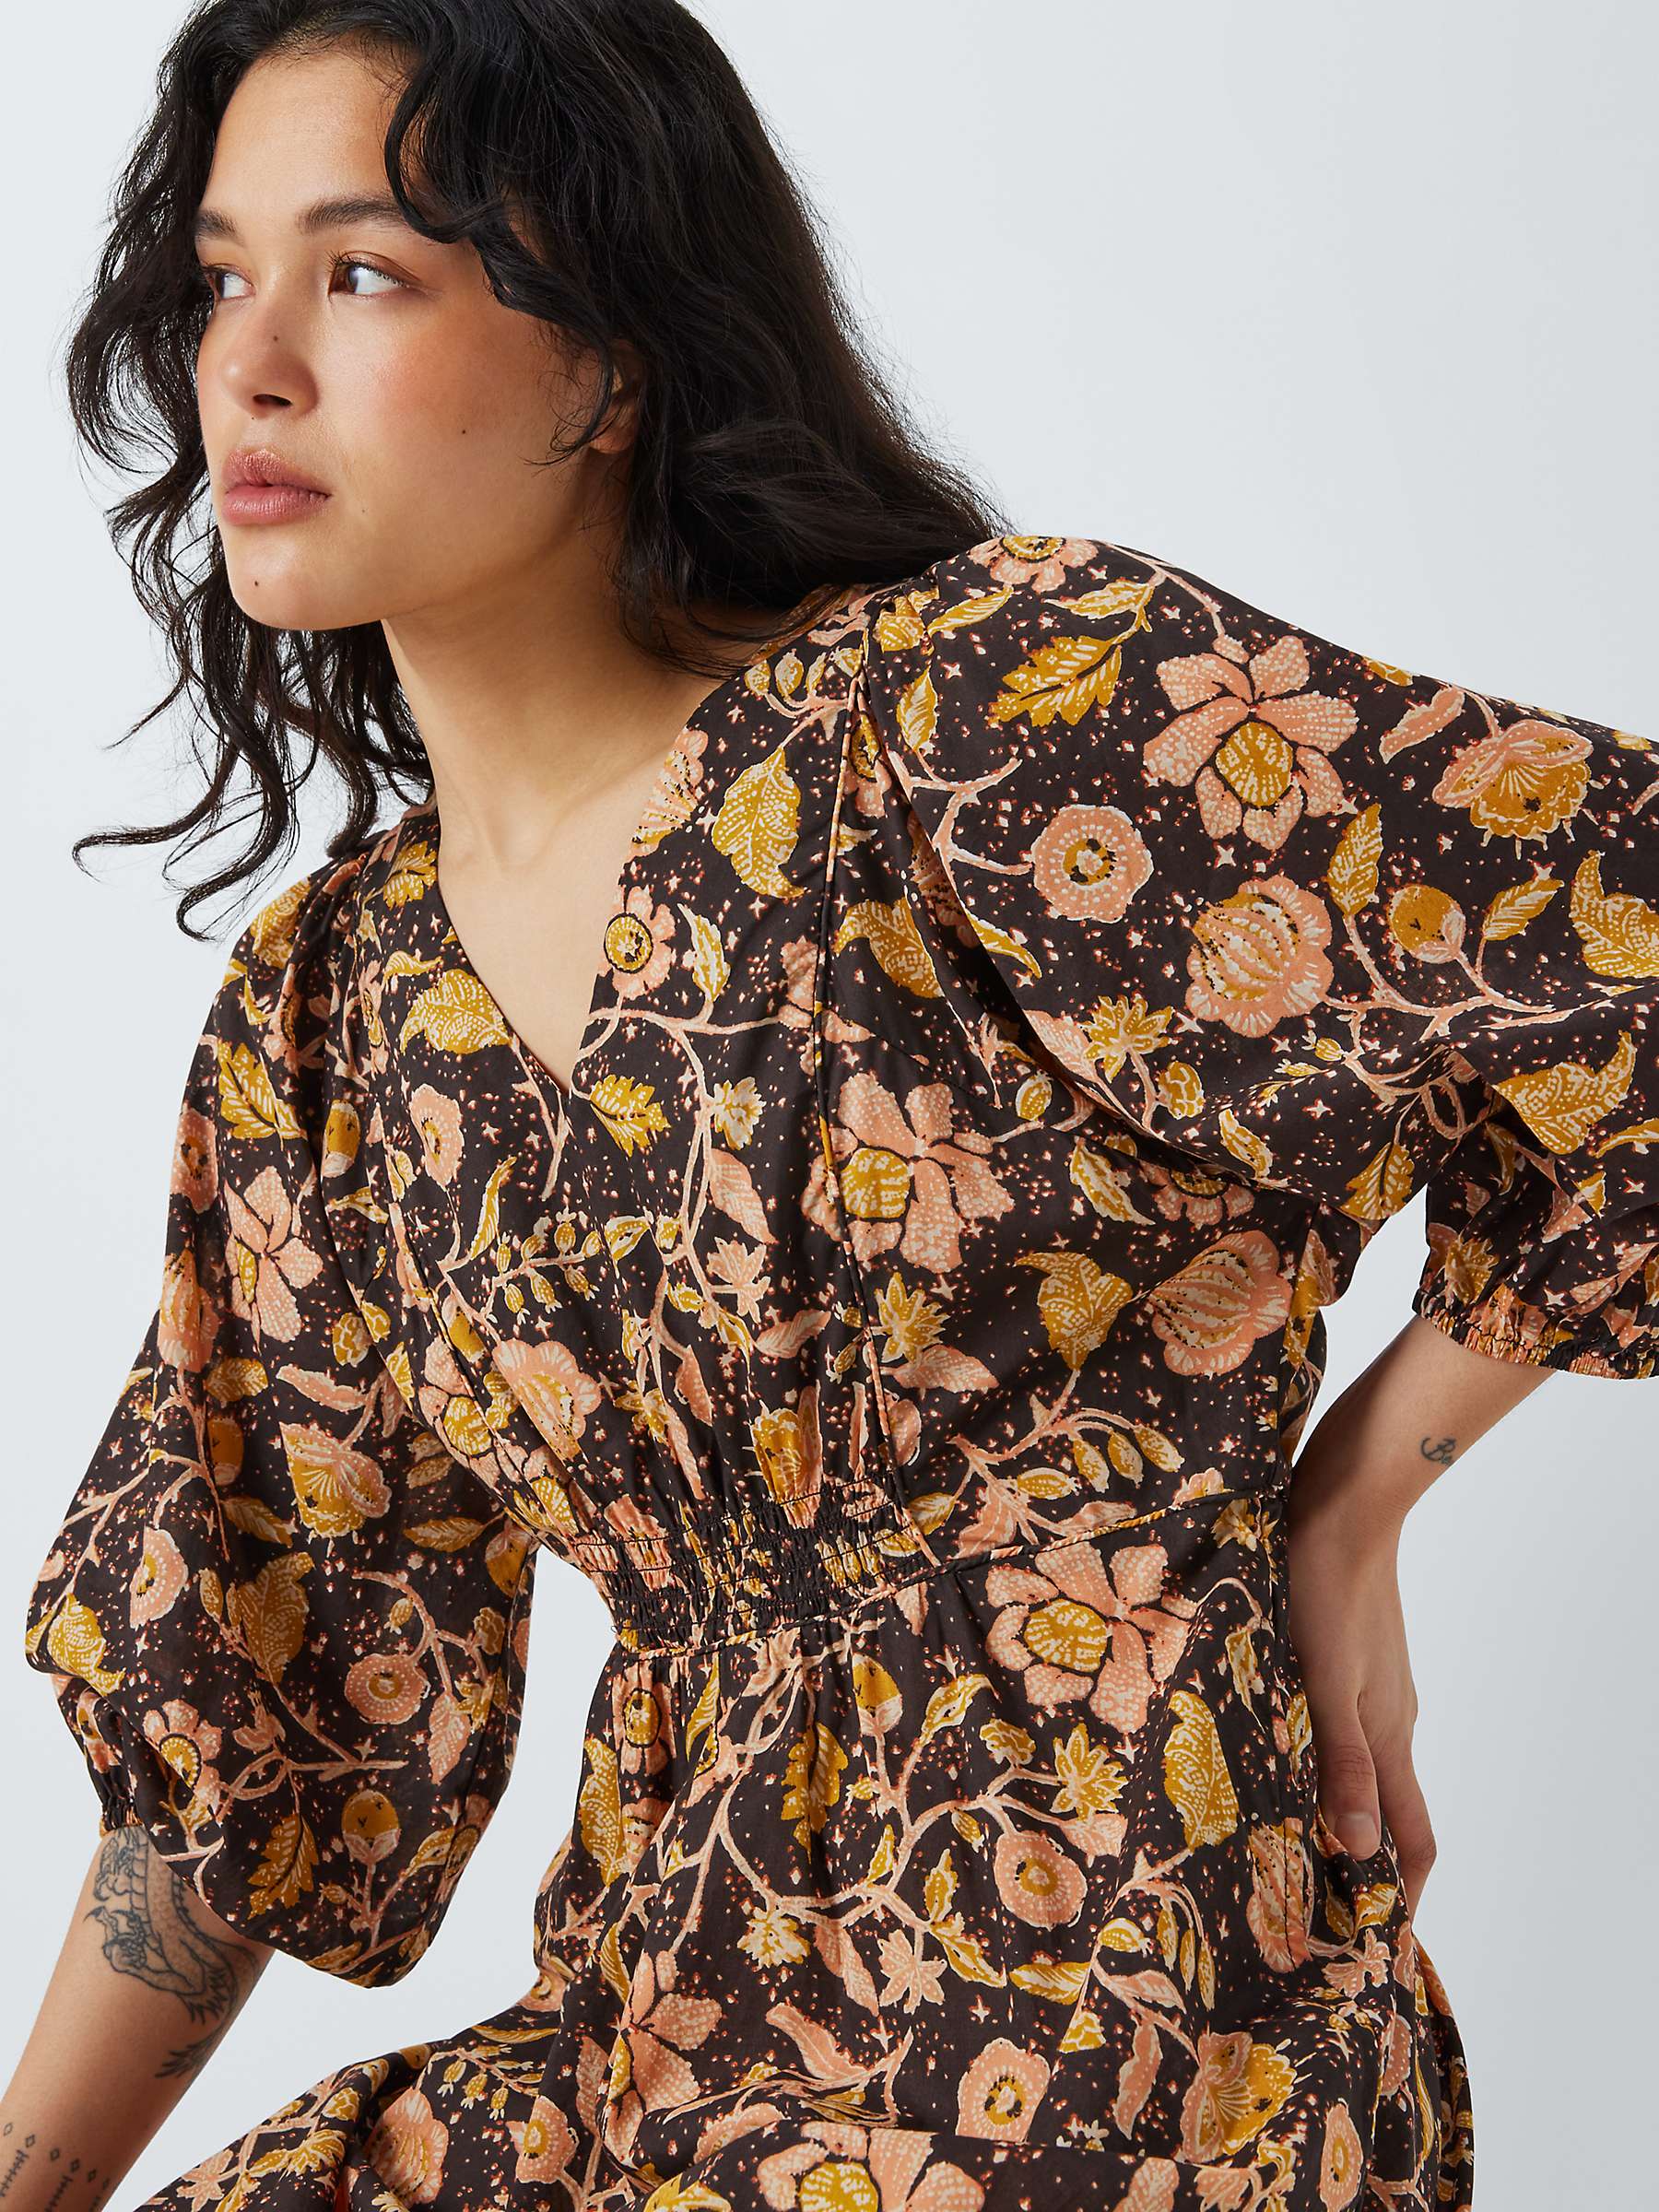 Buy AND/OR Jacklin Island Floral Dress, Chocolate Online at johnlewis.com